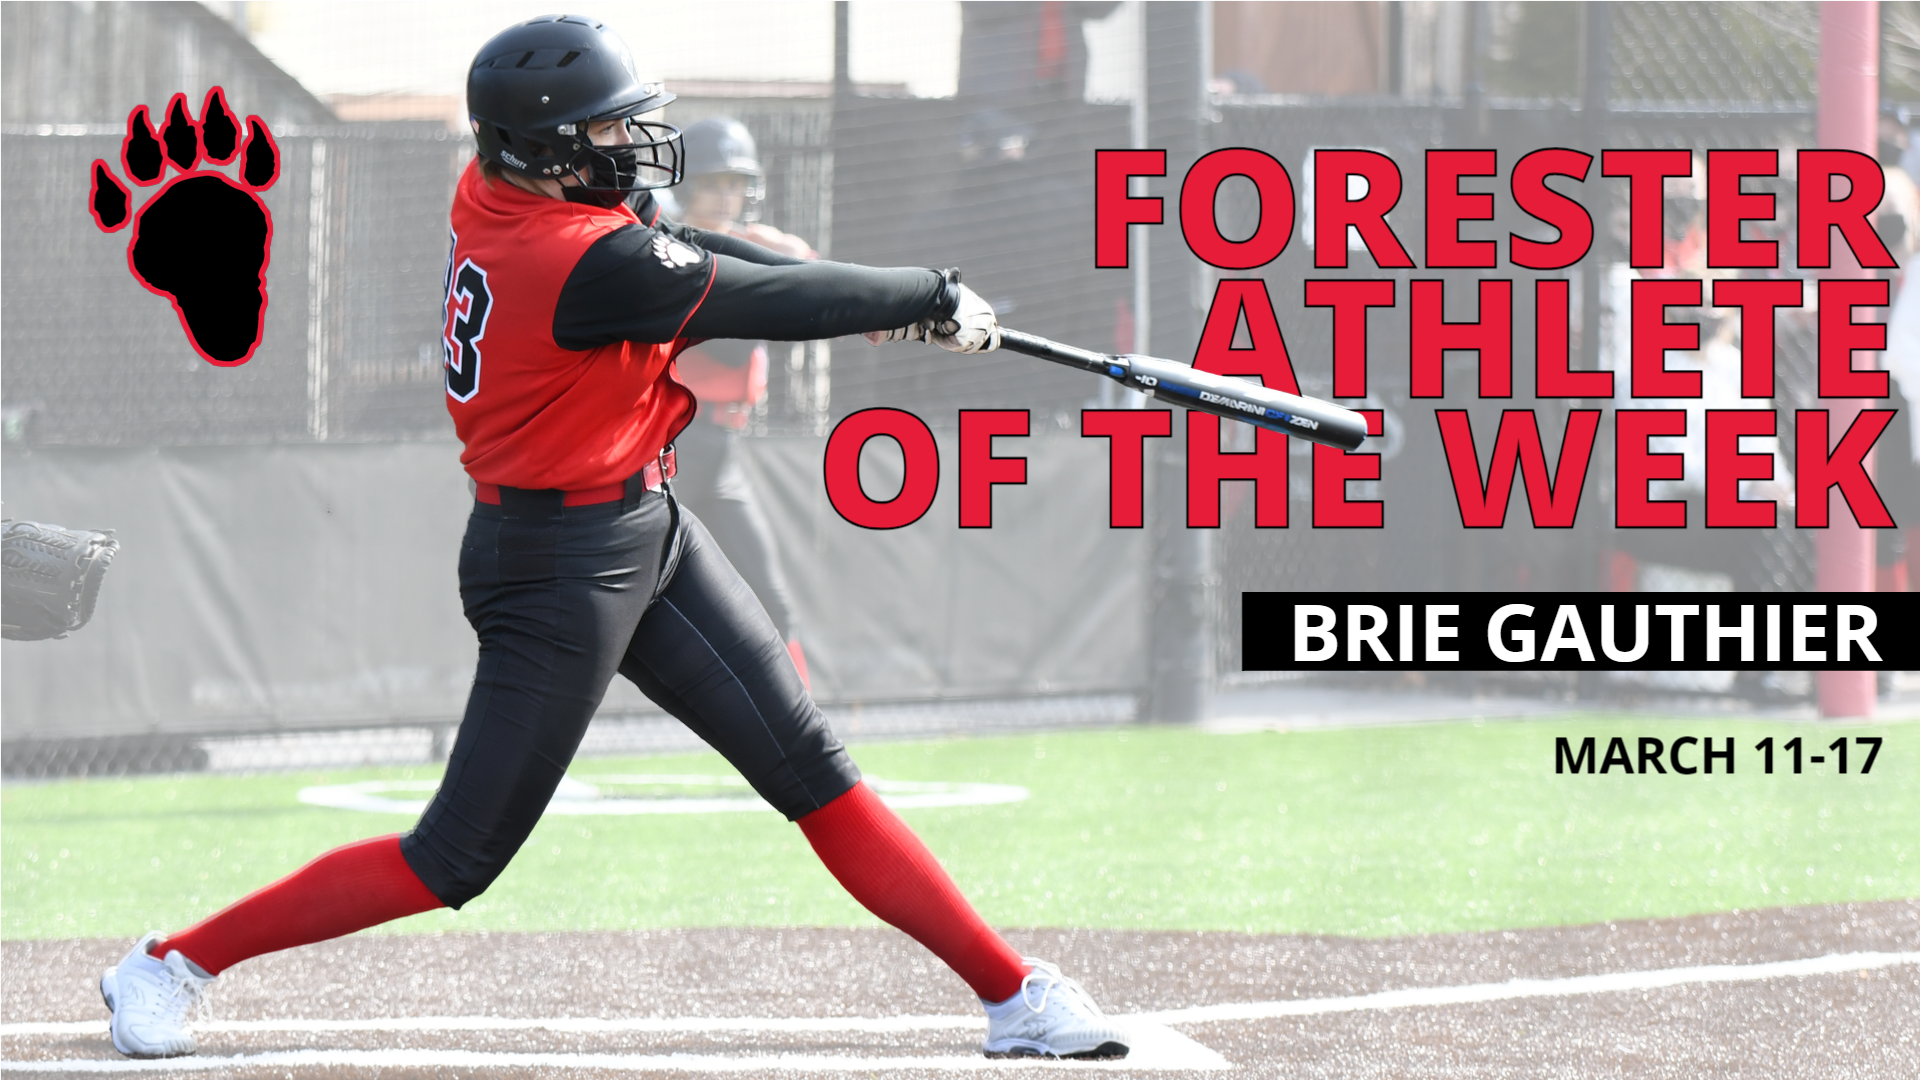 Brie Gauthier Named Forester Athlete of the Week